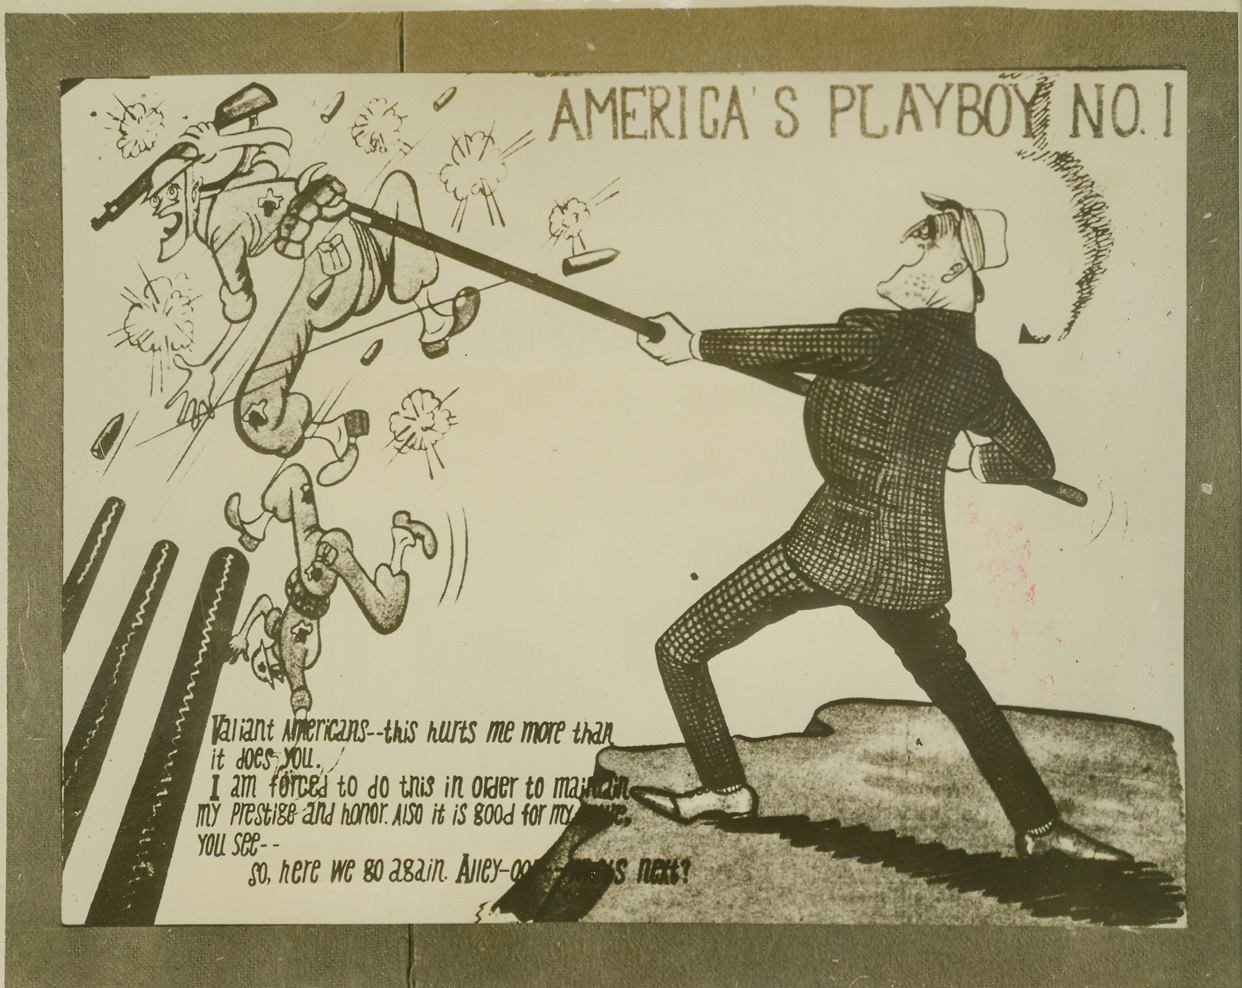 JAP PROPAGANDA, 4/27/1944. WASHINGTON, D.C. – In a not too subtle fashion to follow the Nazi “divide and conquer” technique, Japanese propagandists are using political and pornographic cartoons in an effort to split the Allies and undermine soldier morale. Some cartoons are designed to undermine confidence in Allied leaders. The one above refers to President Roosevelt as “America’s No. 1 Playboy.” It shows the Chief Executive pushing a soldier in front of a Jap cannon. The leaflets were made available by the OWI Foreign News Bureau. Credit: ACME;